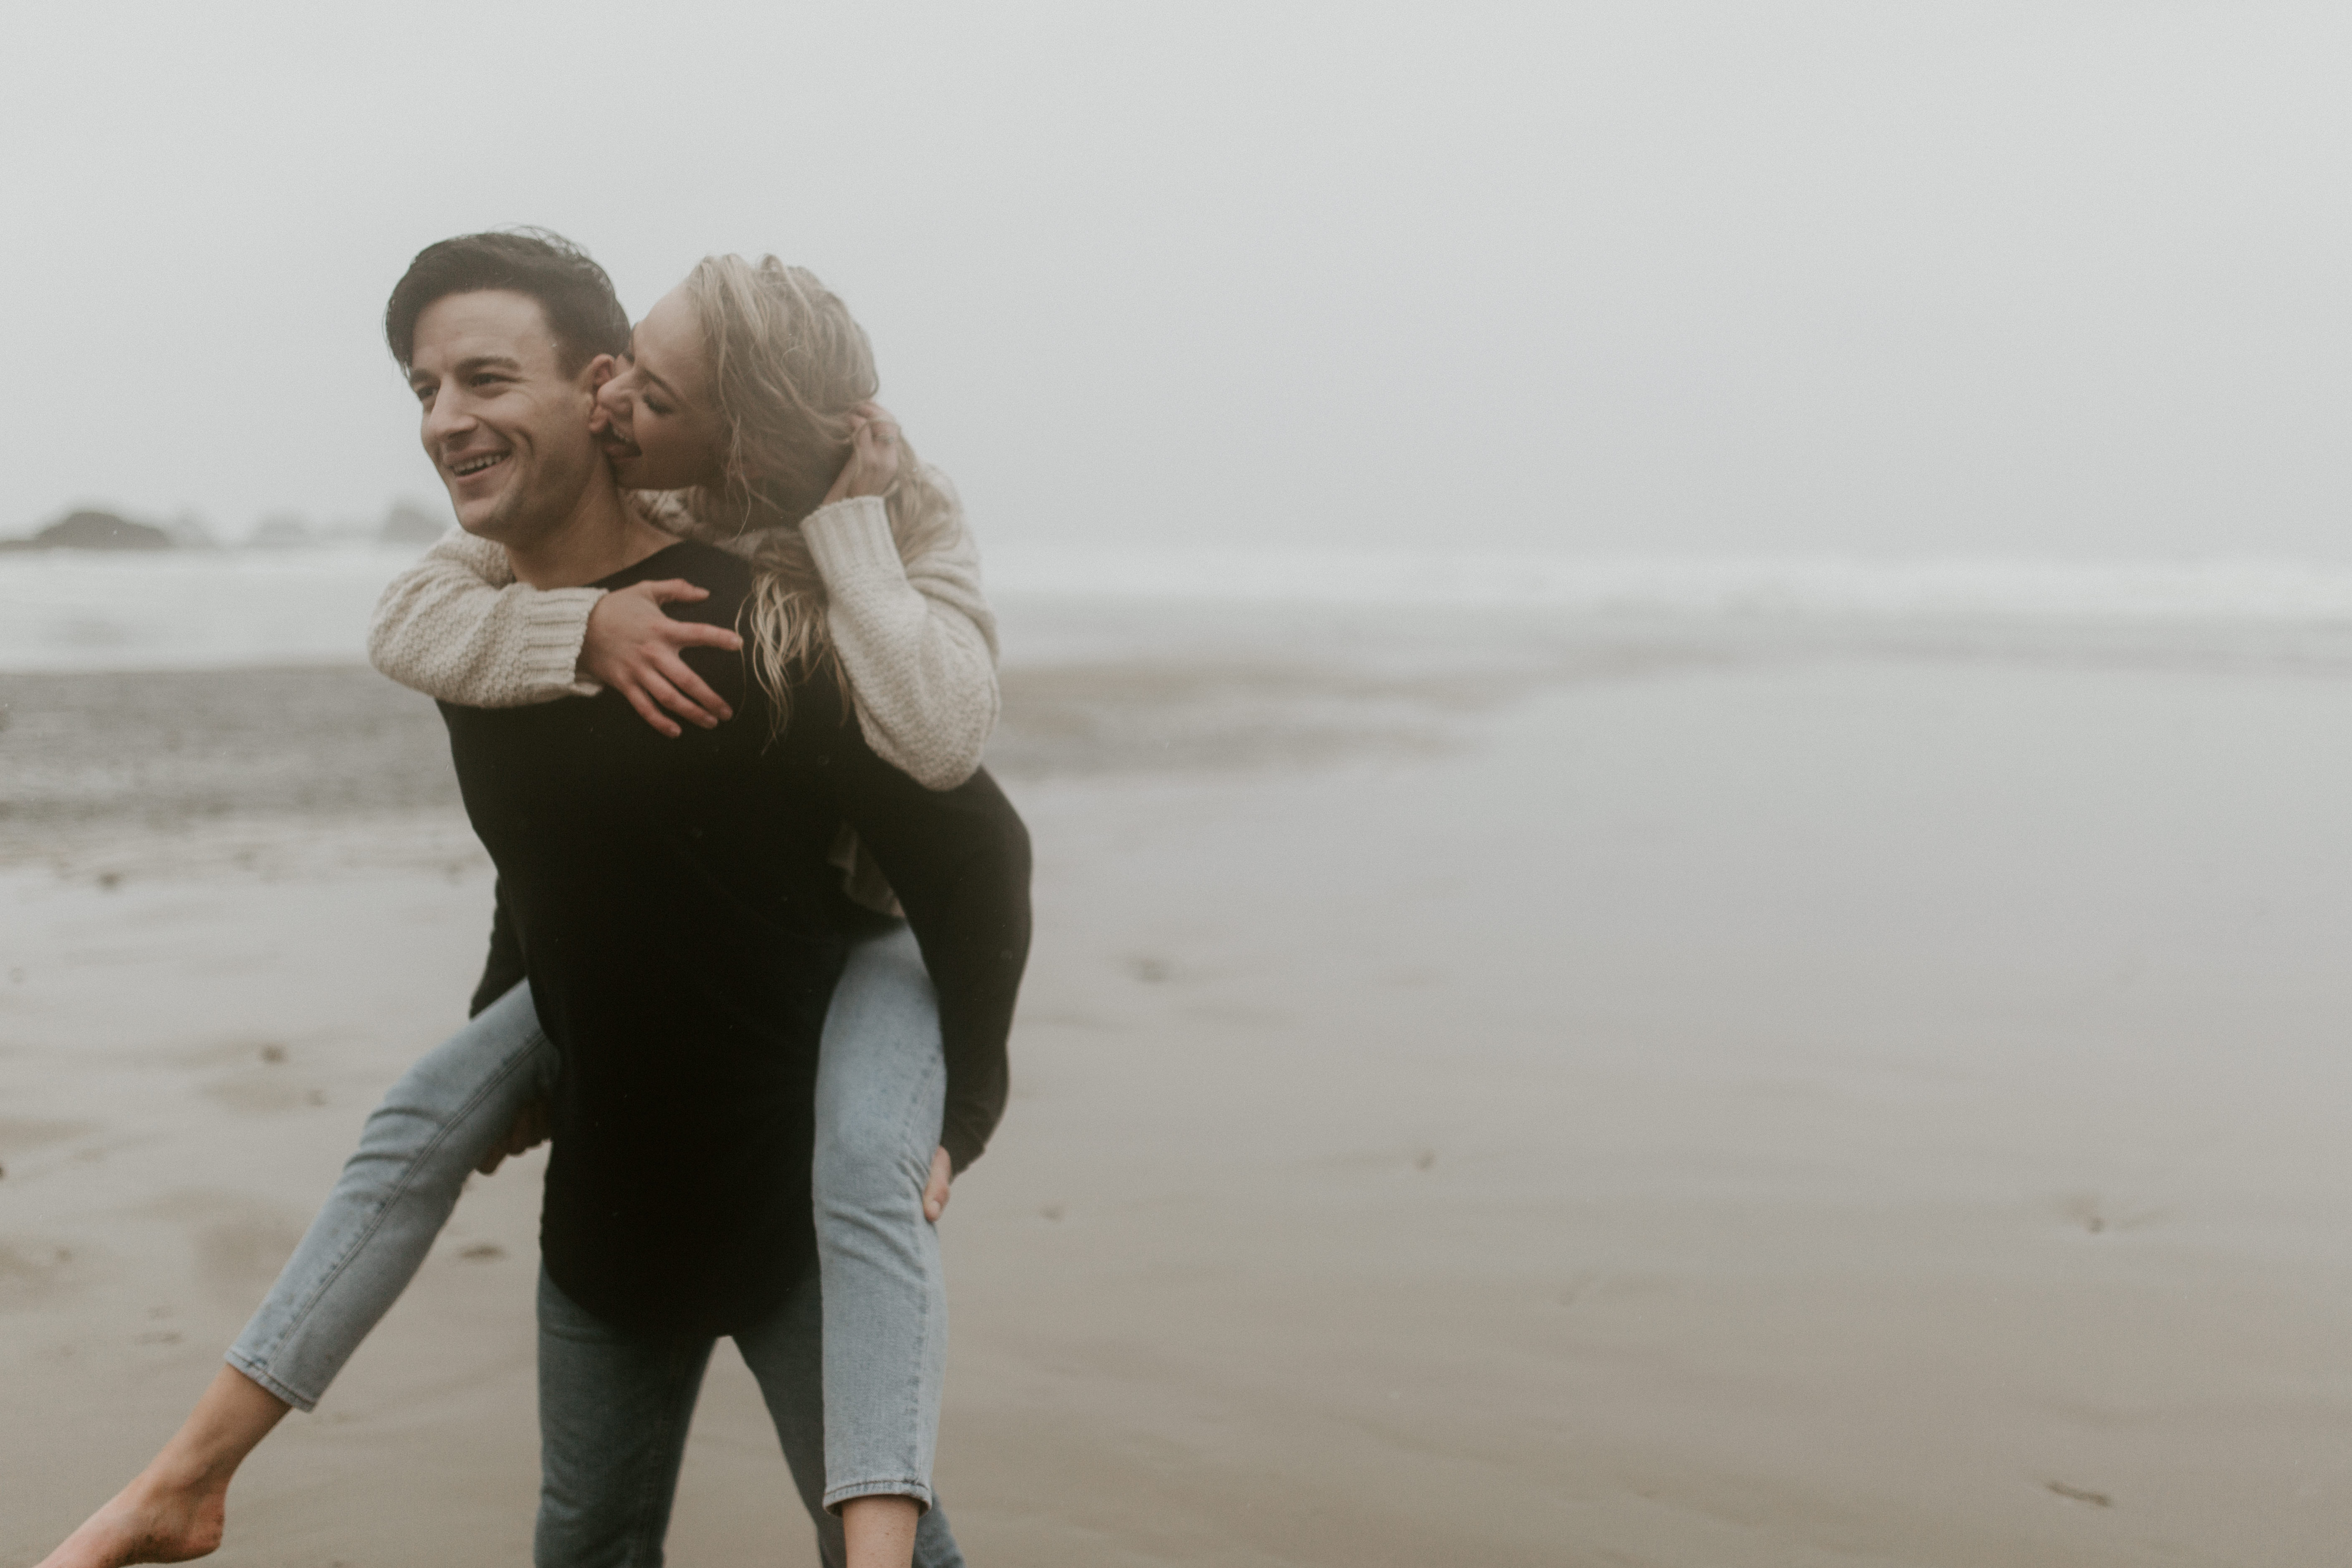 Grant gives Hannah a piggyback ride along Indian Beach in Ecola State Park, Oregon. Engagement photography in Oregon by Sienna Plus Josh.